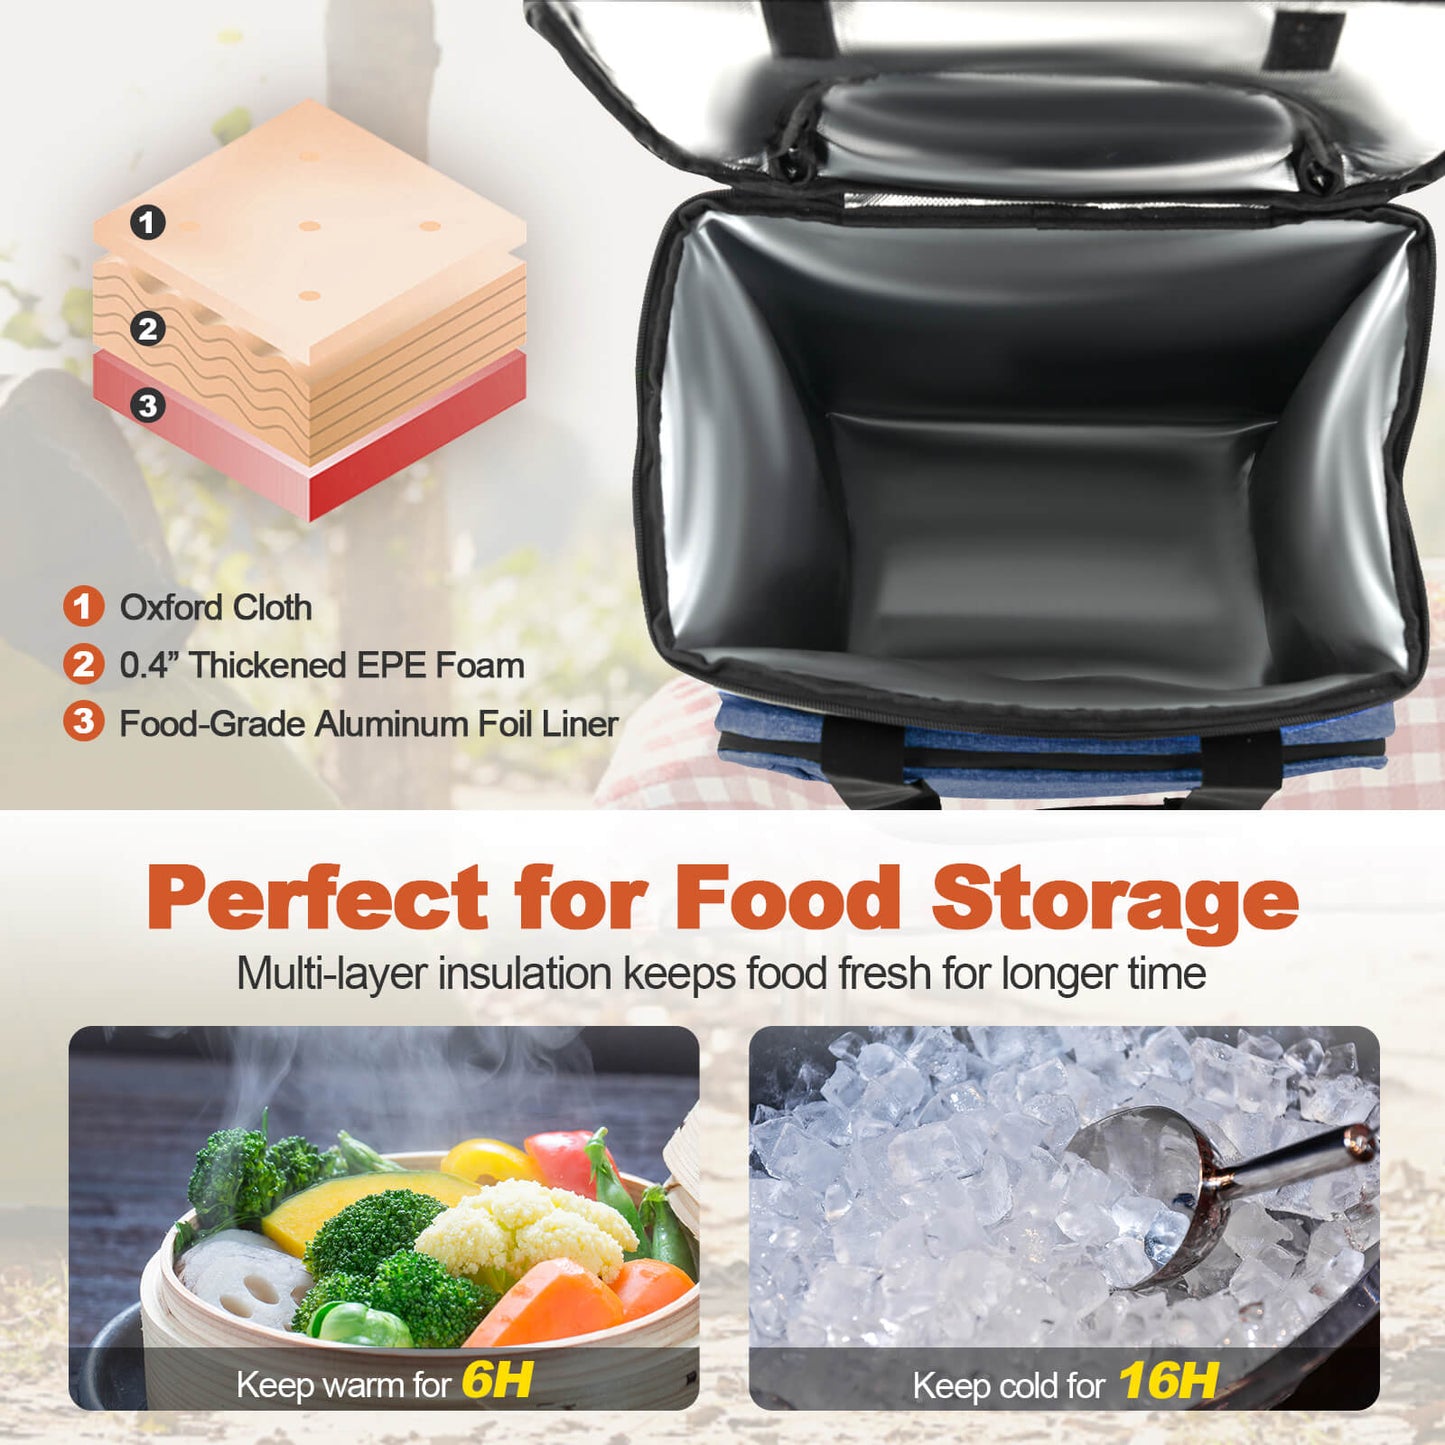 50-Can Large Leakproof Rolling Cooler with Detachable Bottom Plate, Dark Blue